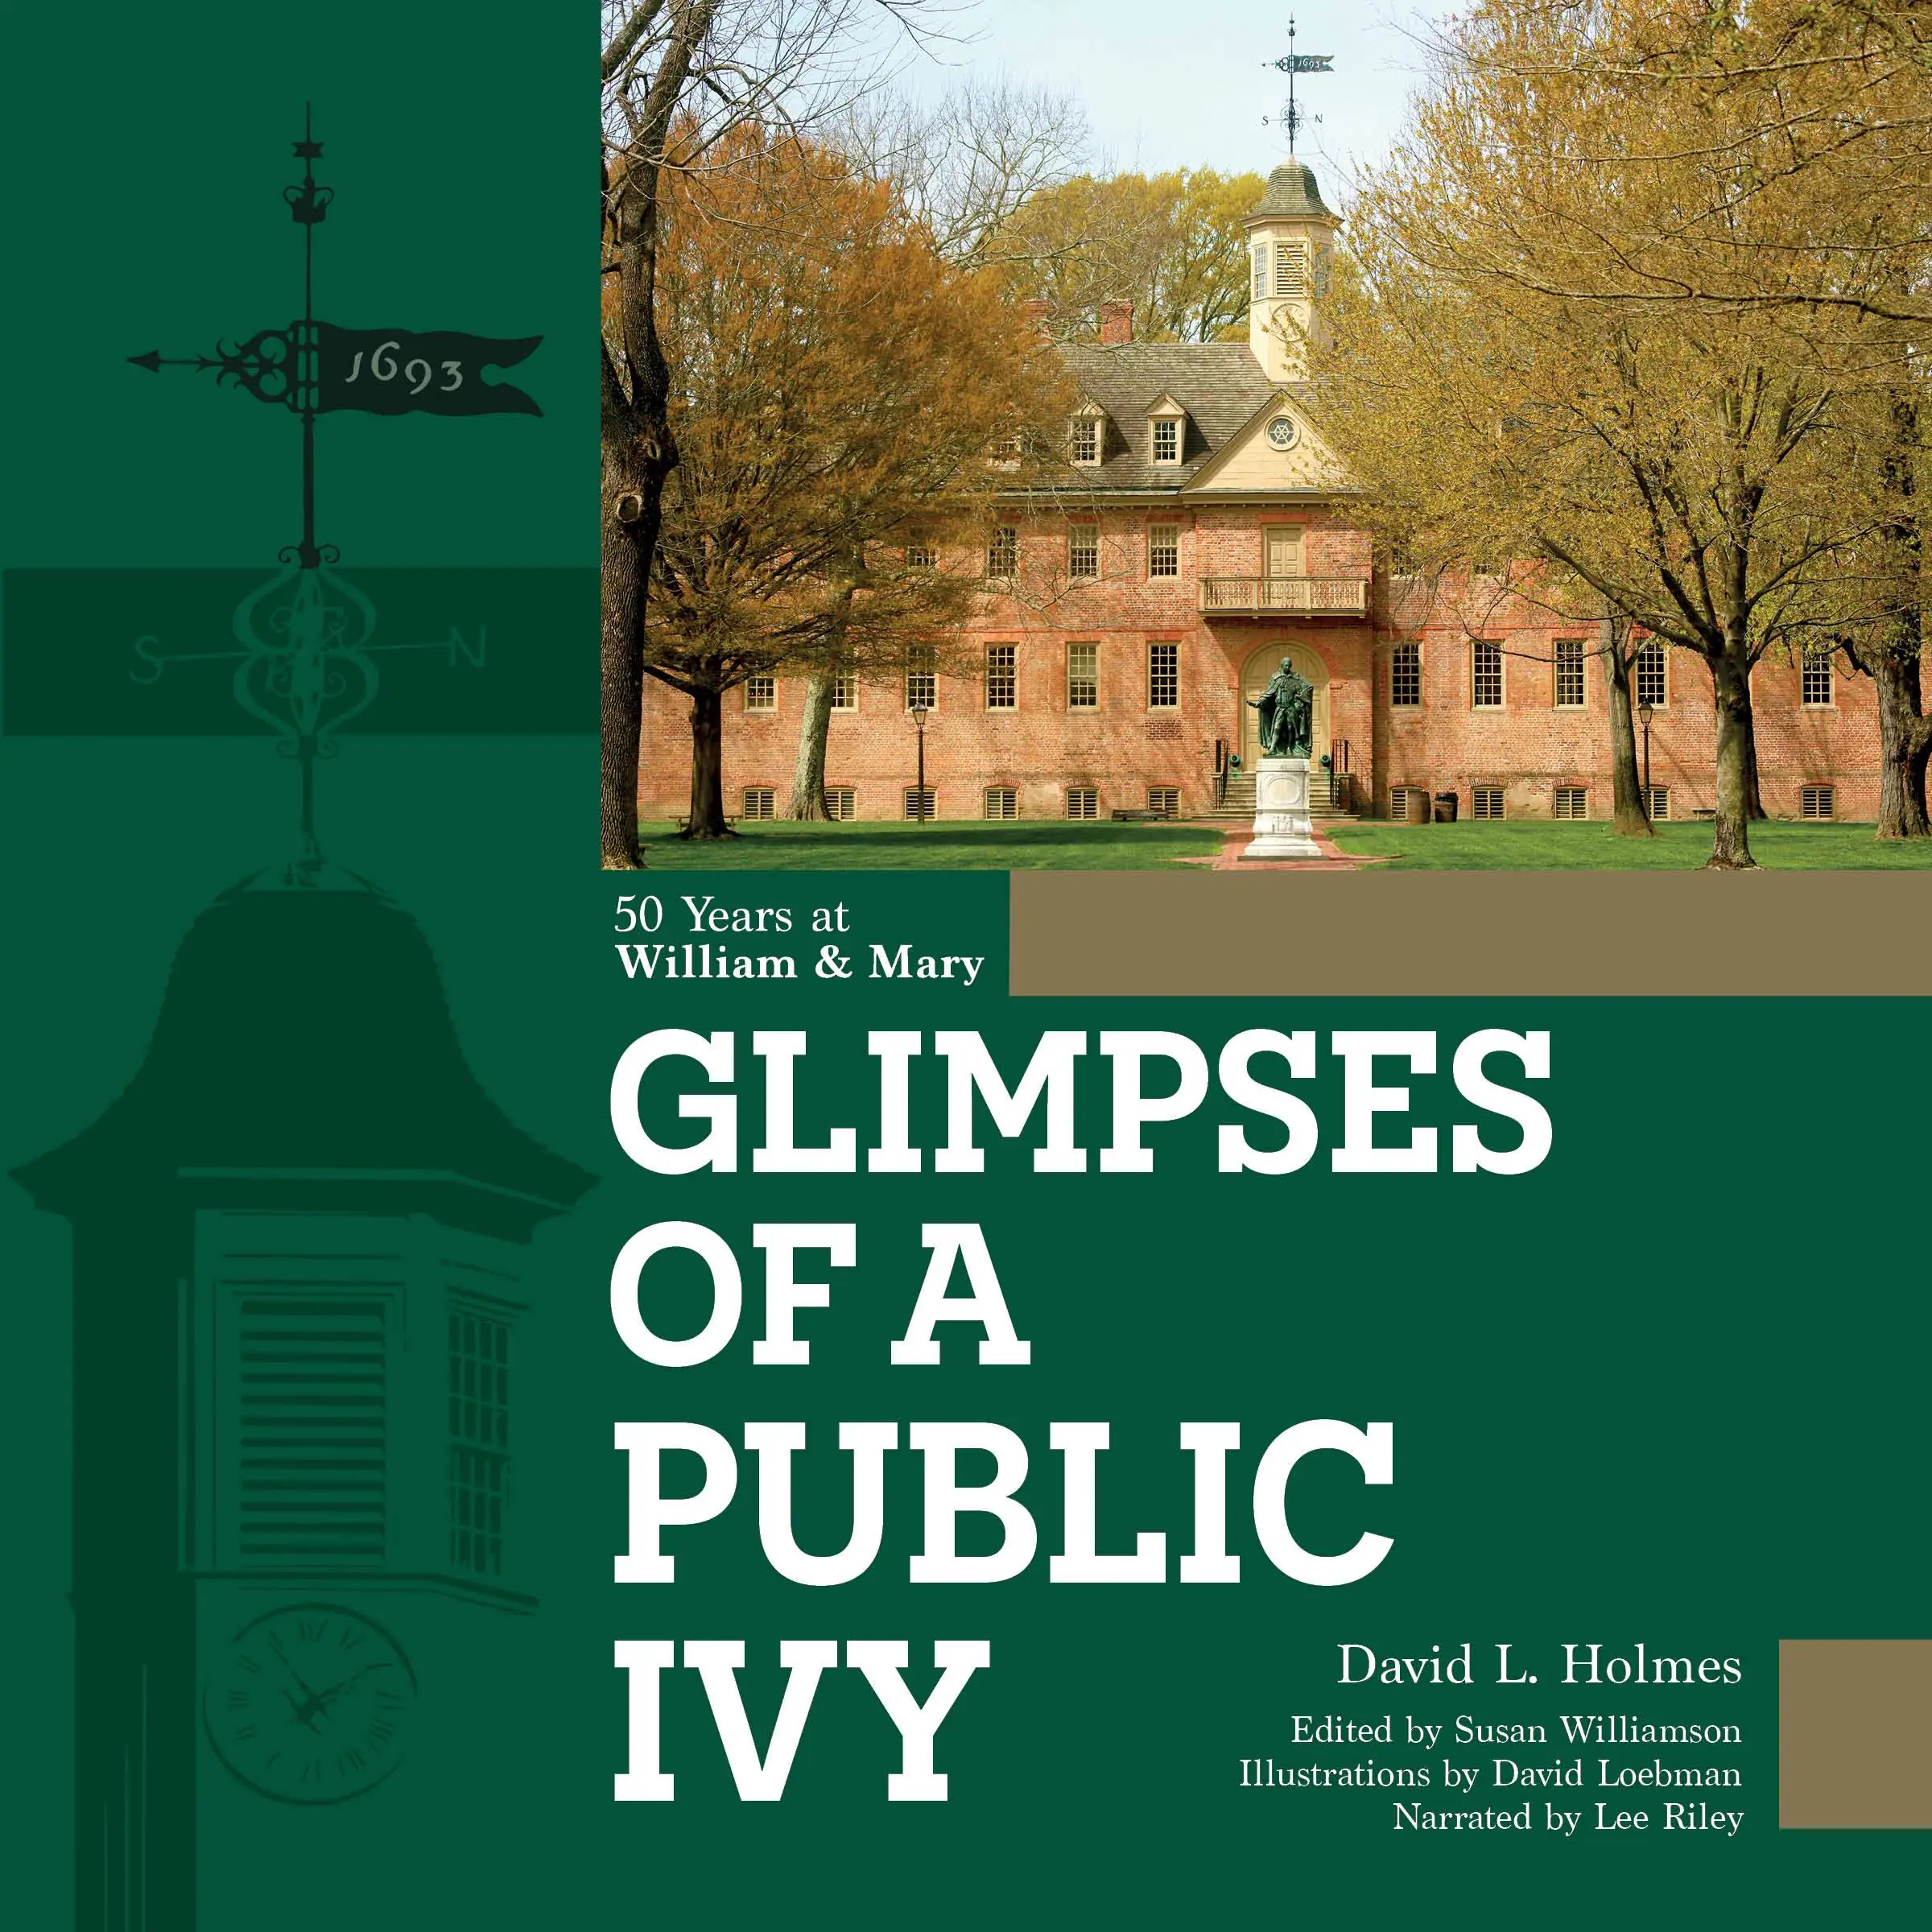 Glimpses of a Public Ivy Audiobook by David L Holmes